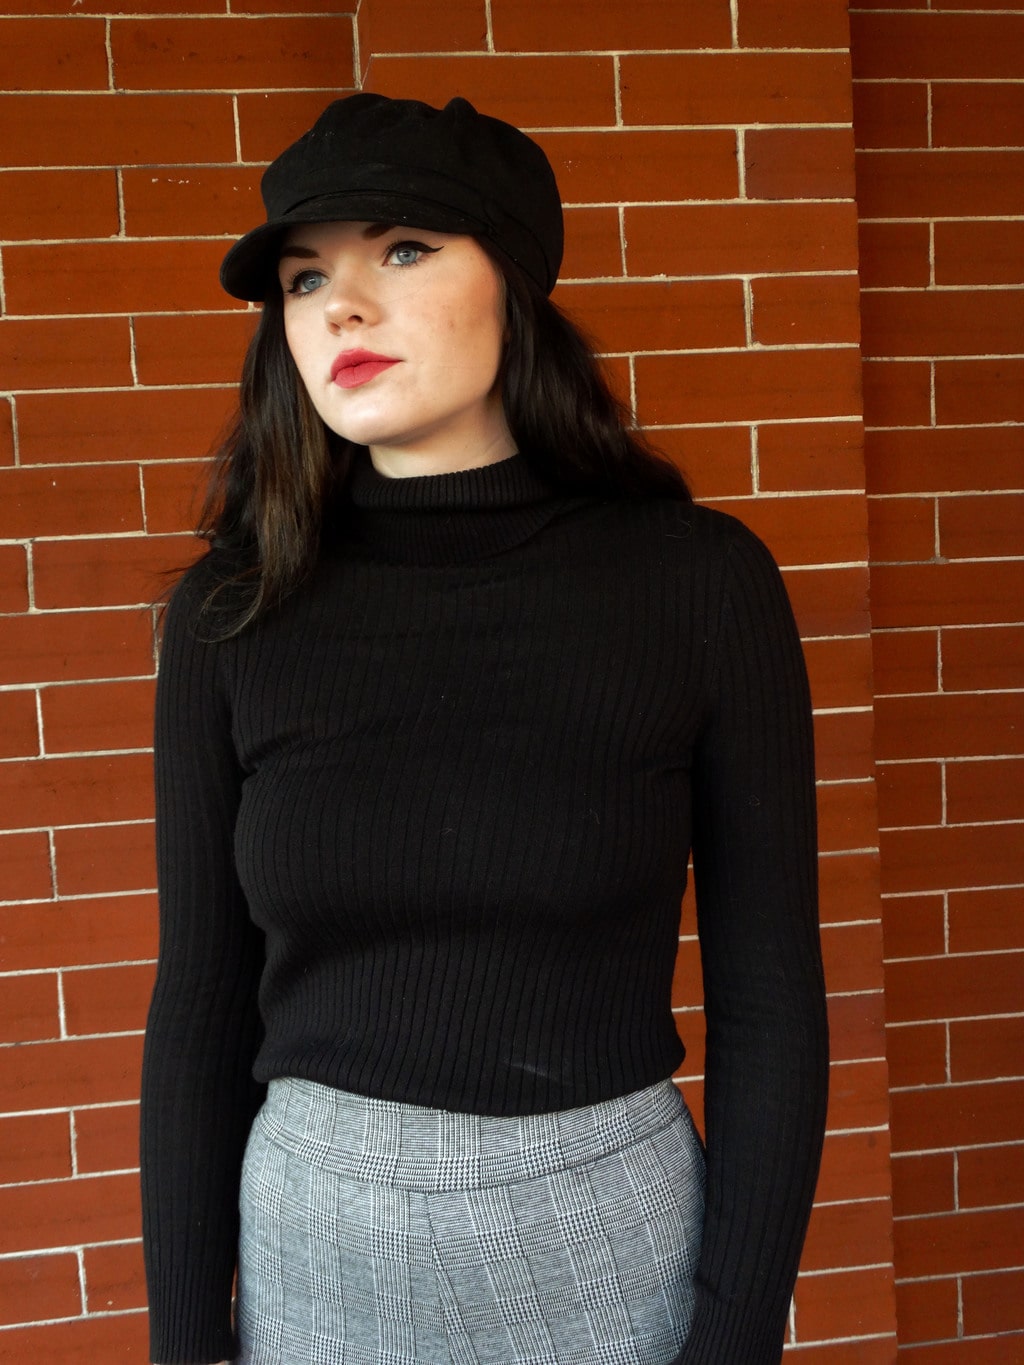 Mackenzie styles a tight black turtleneck sweater with high-waisted checkered pants and a black cabby hat.